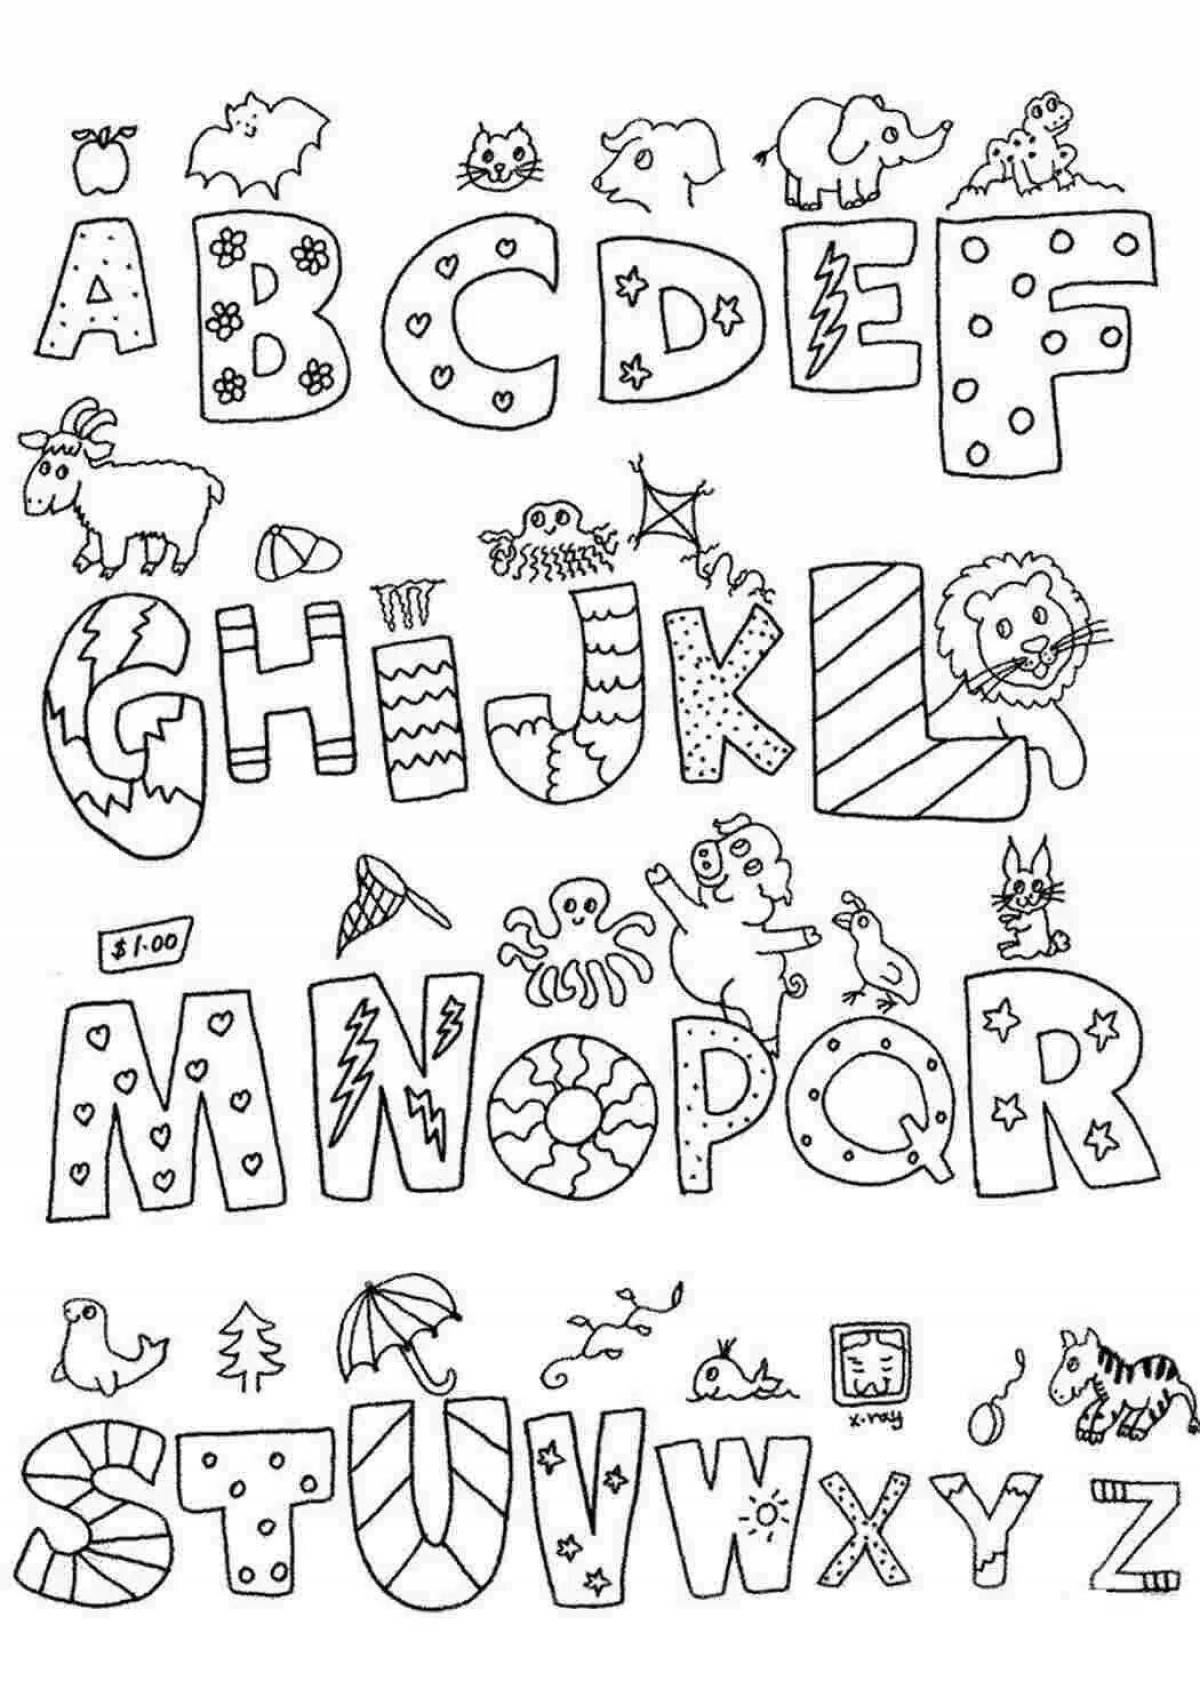 A fun coloring book for kids with English letters